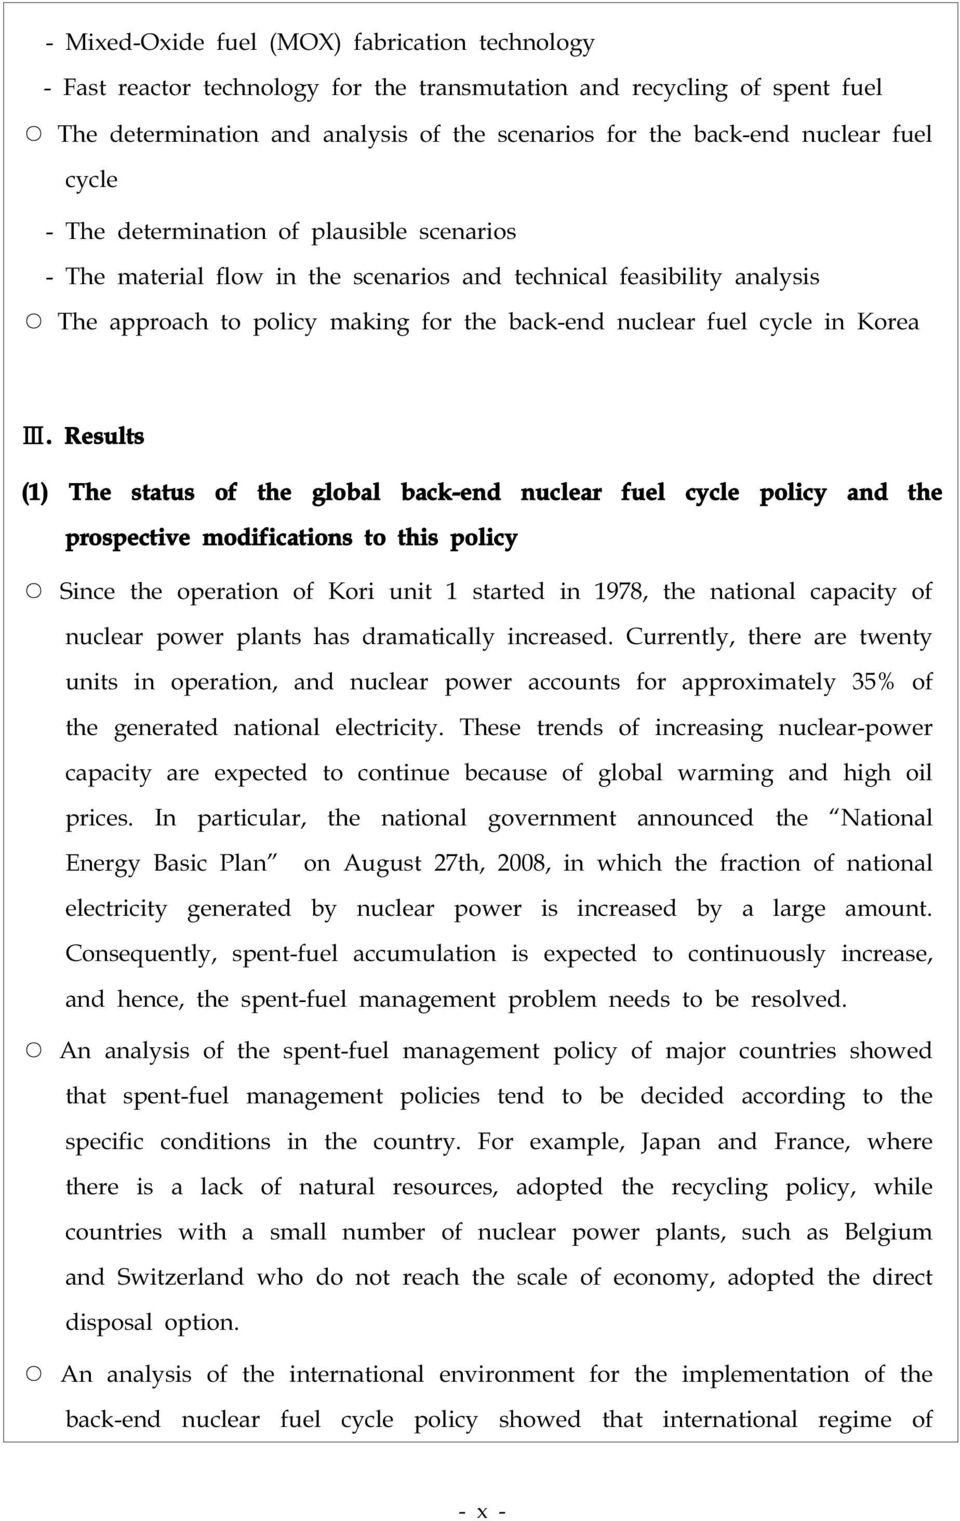 Results (1) The status of the global back-end nuclear fuel cycle policy and the prospectivemodificationstothispolicy Sincetheoperation ofkoriunit1 started in 1978,thenationalcapacity of